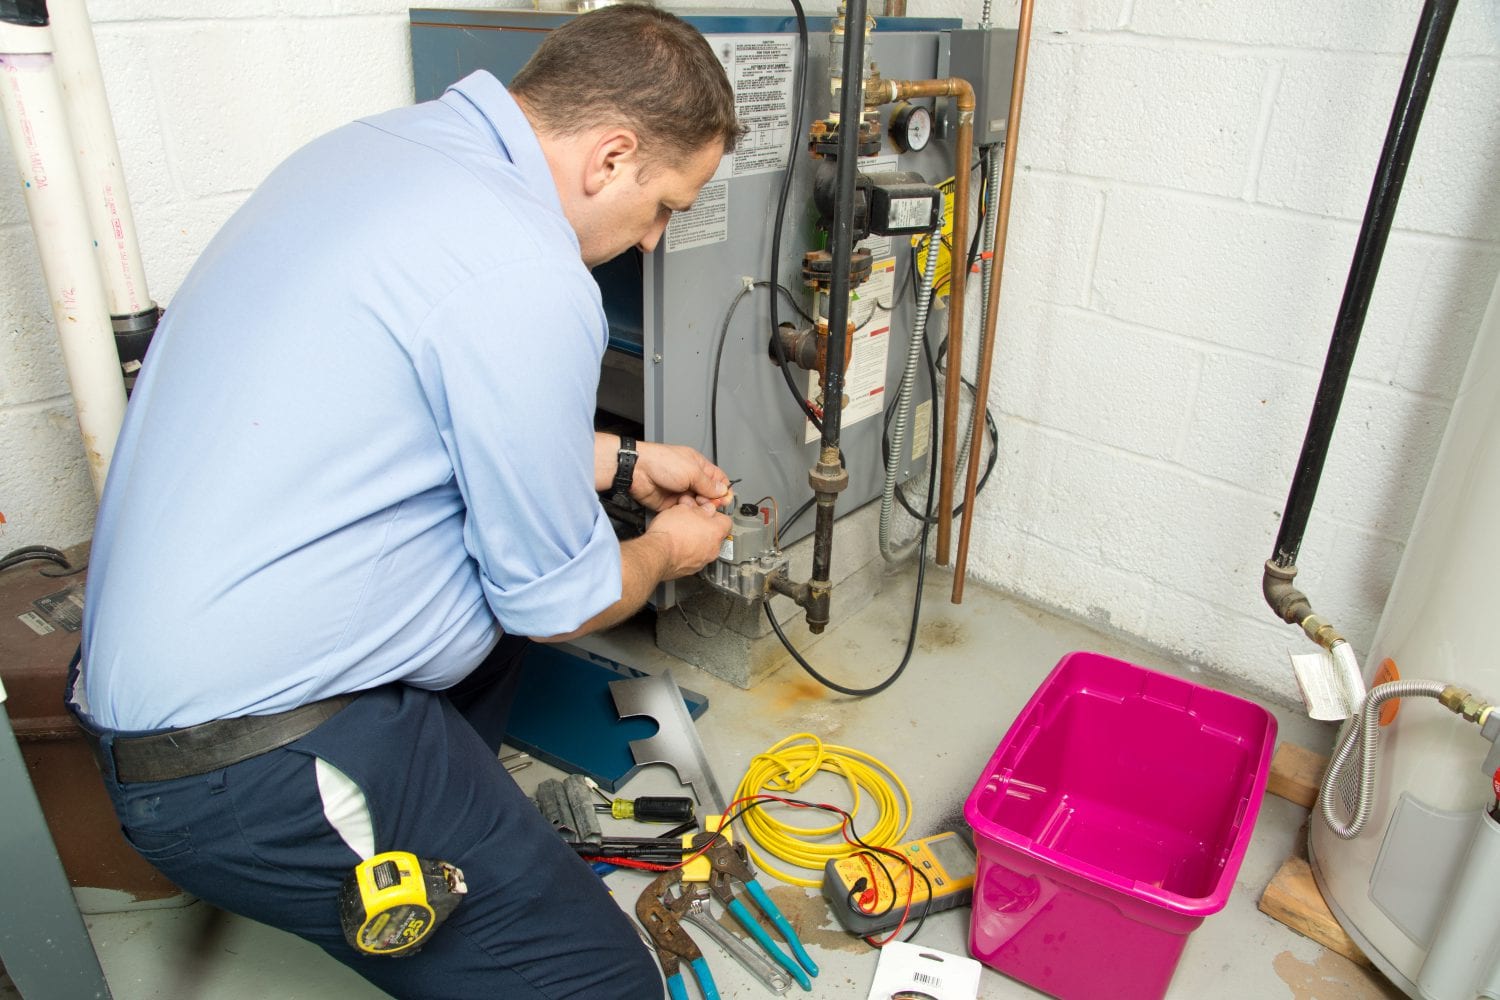 Furnace Installation, Replacement, And Repair In St. Louis